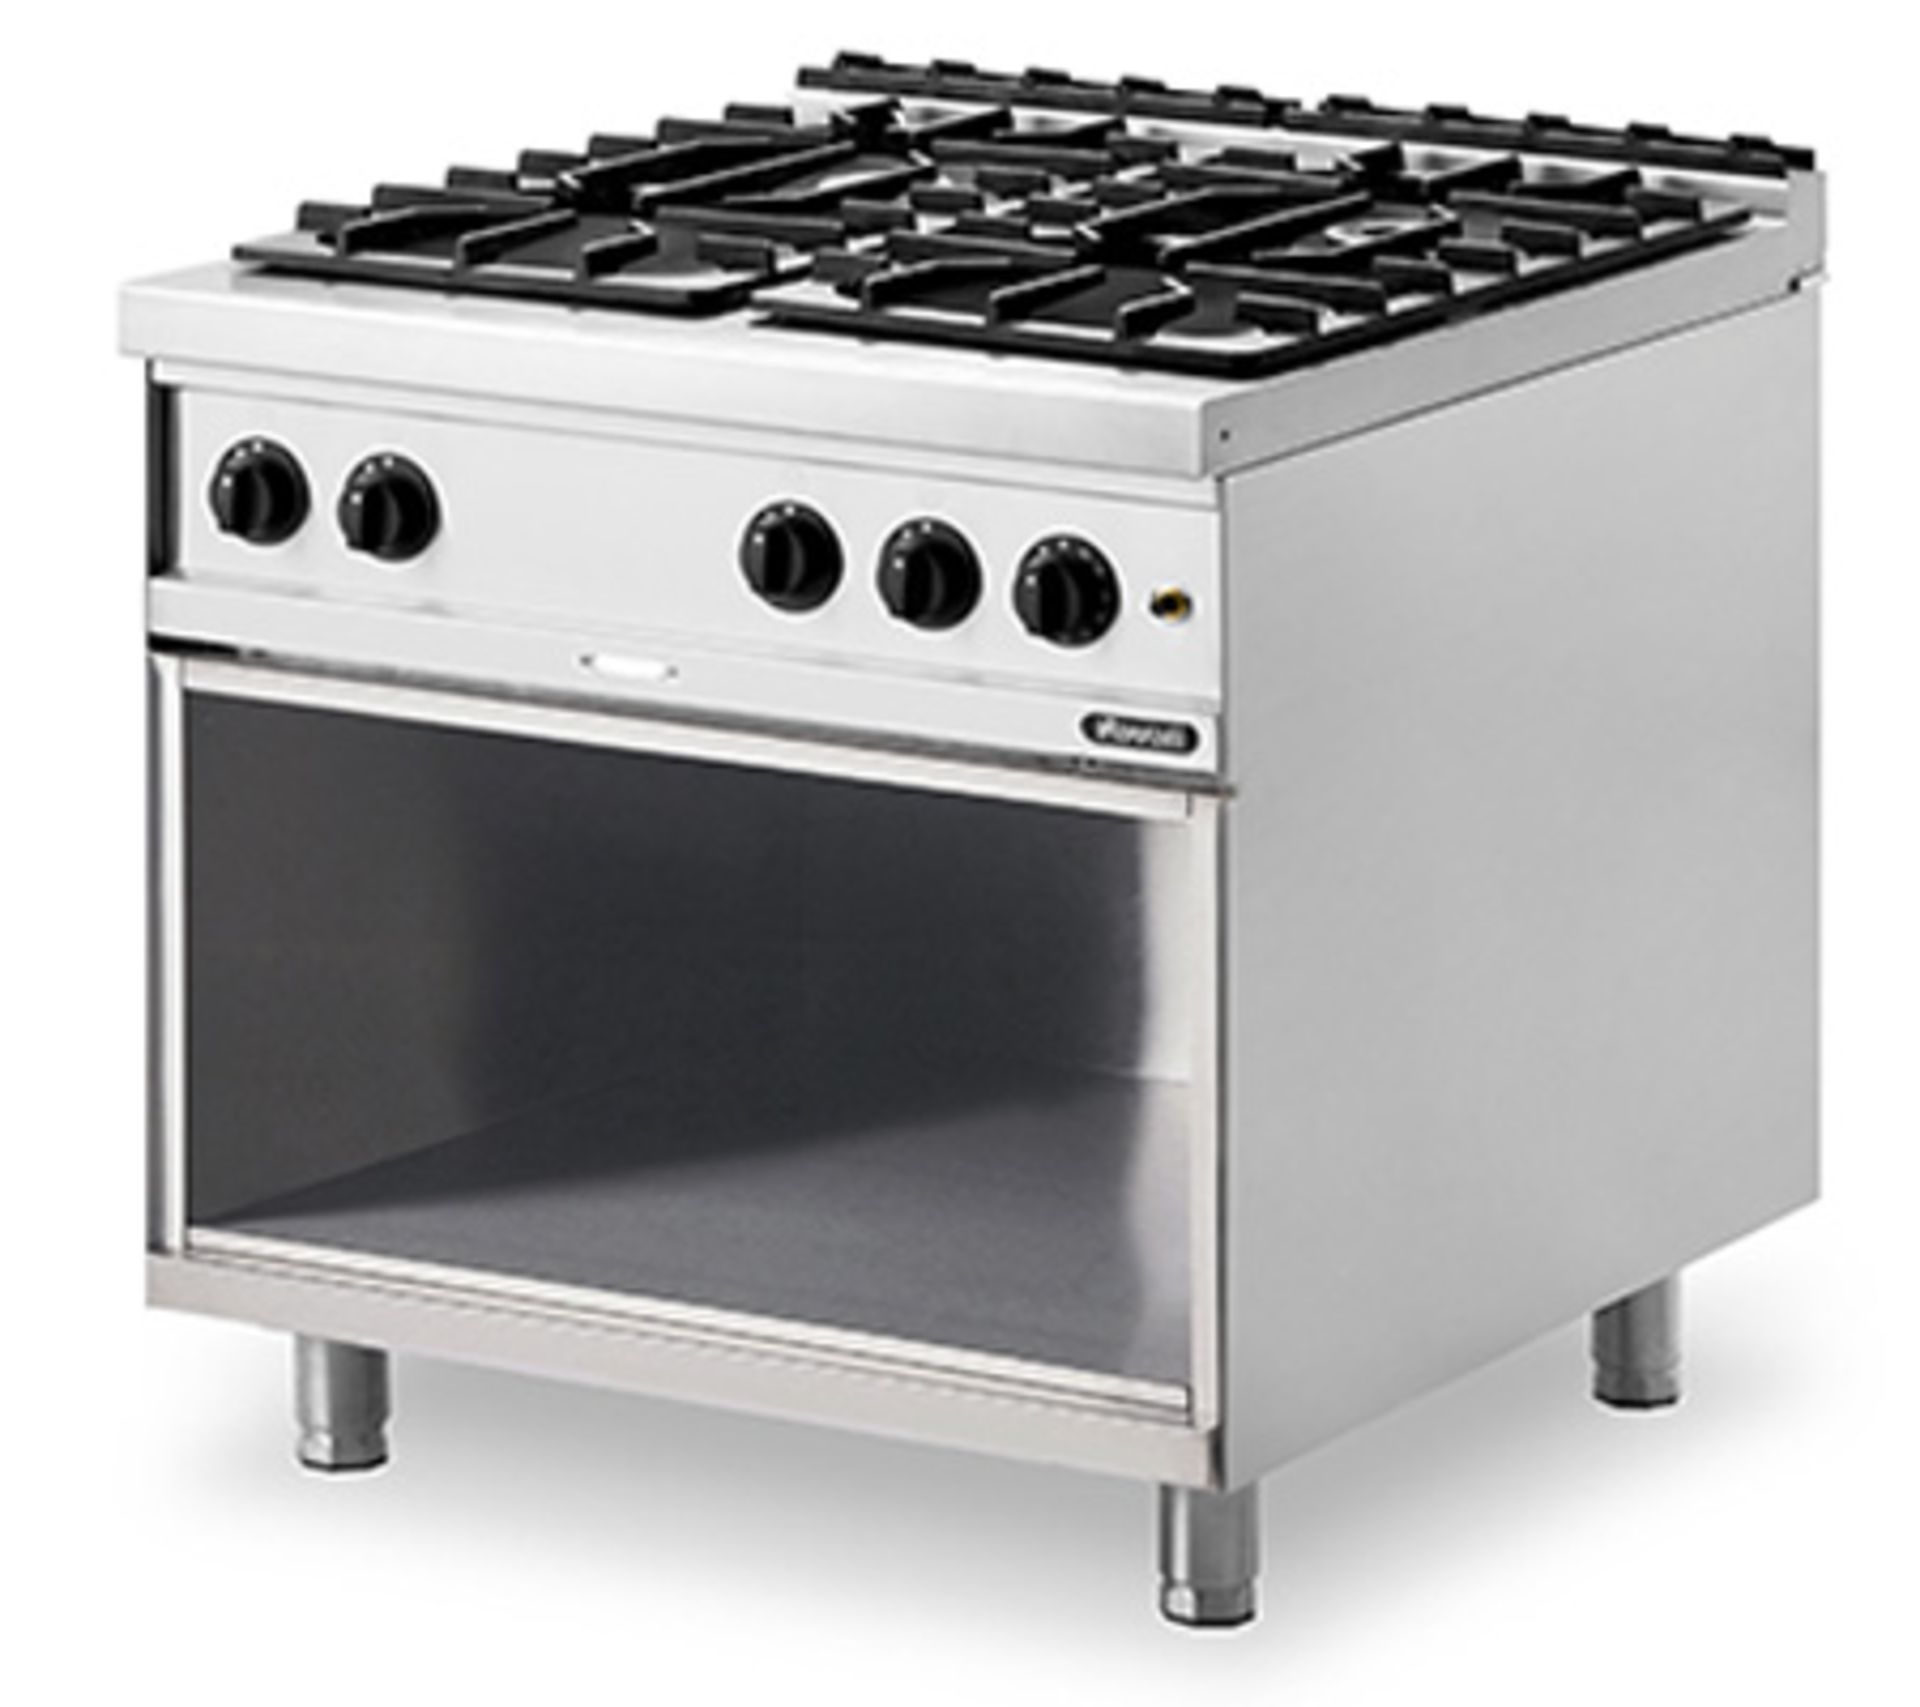 *Grandis 900 Range, gas, stand-alone or suite, (4) open burners, manual controls, cabinet base, drip